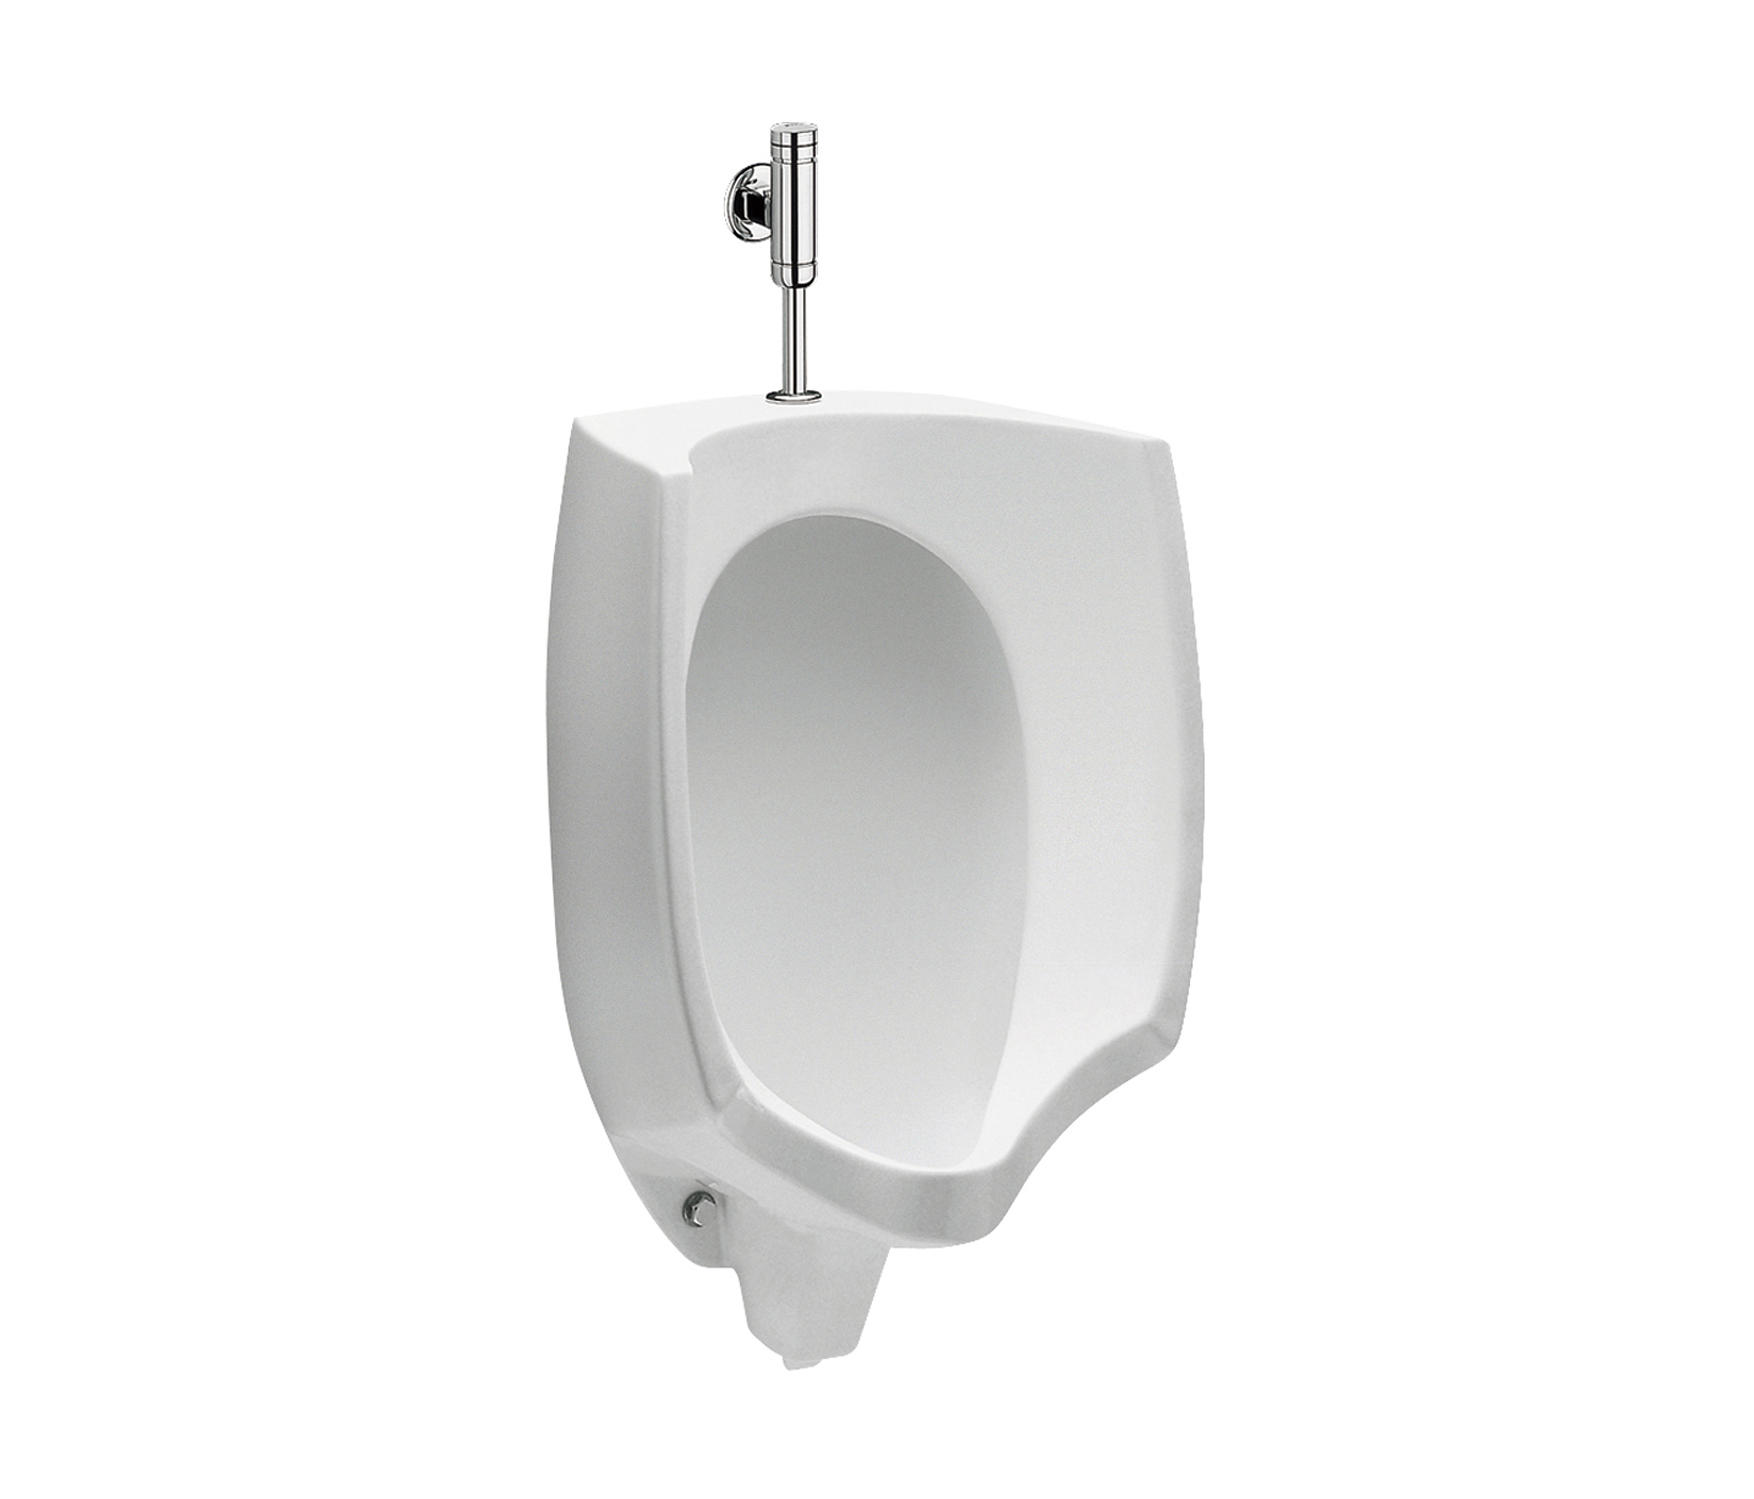 guardarropa pequeño misericordia Mural | Urinal - High quality designer products | Architonic